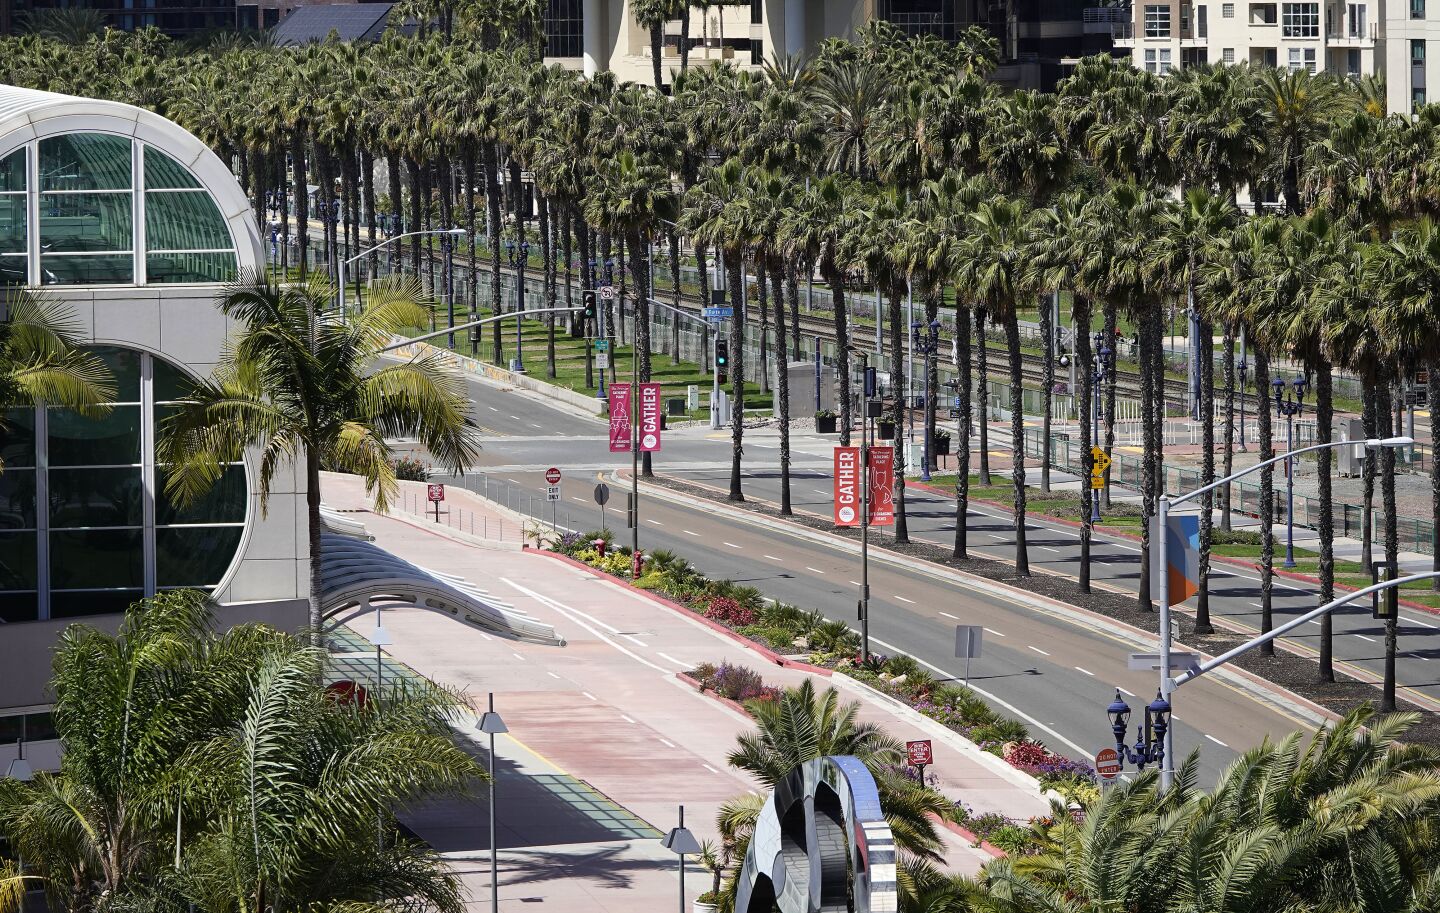 The normally busy Harbor Drive in front of the San Diego Convention Center was quiet on March 23, 2020.